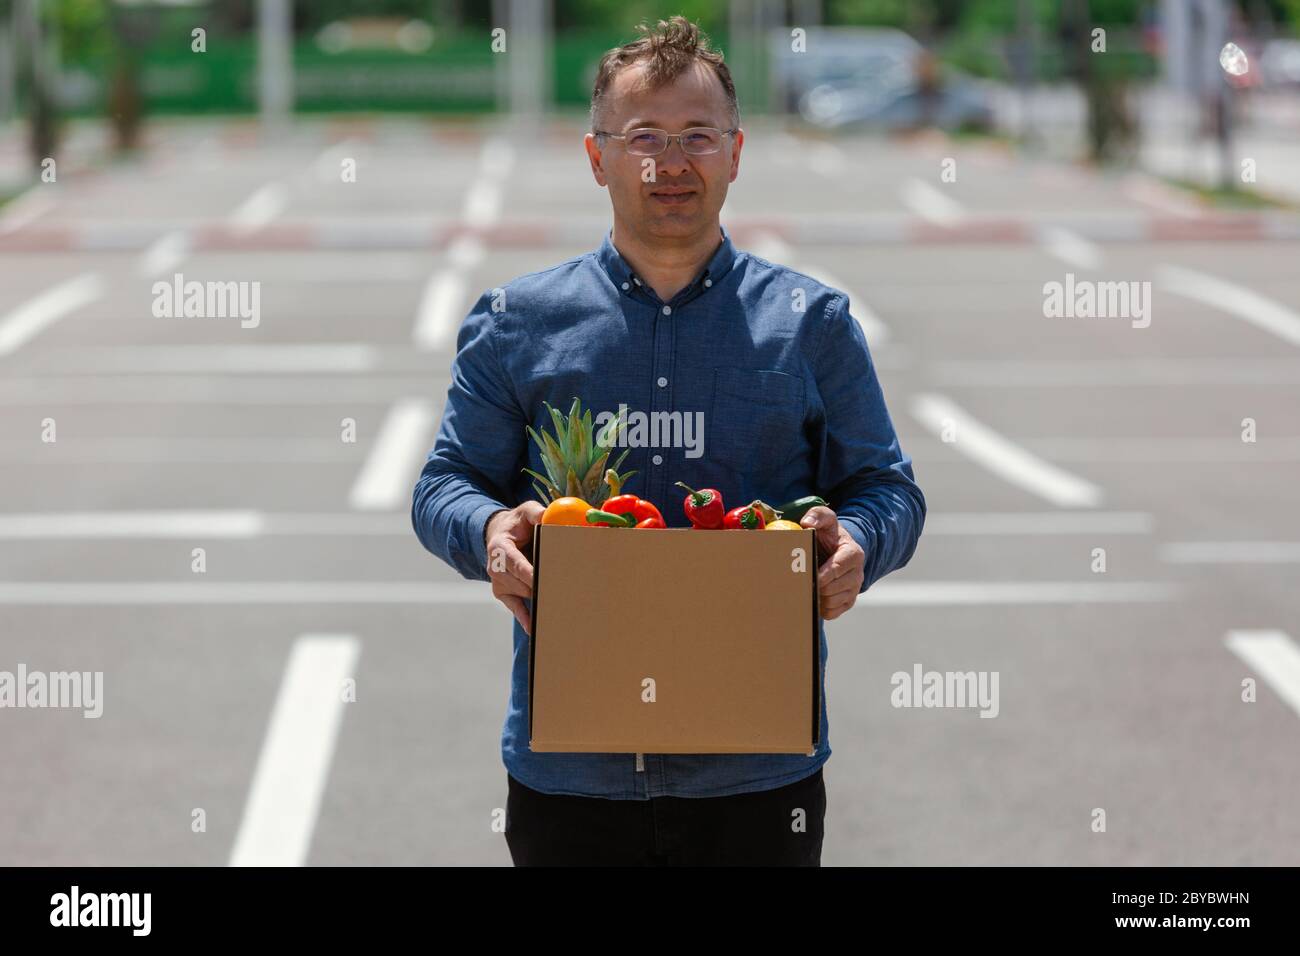 Delivery man holding a food box, food delivery man Stock Photo